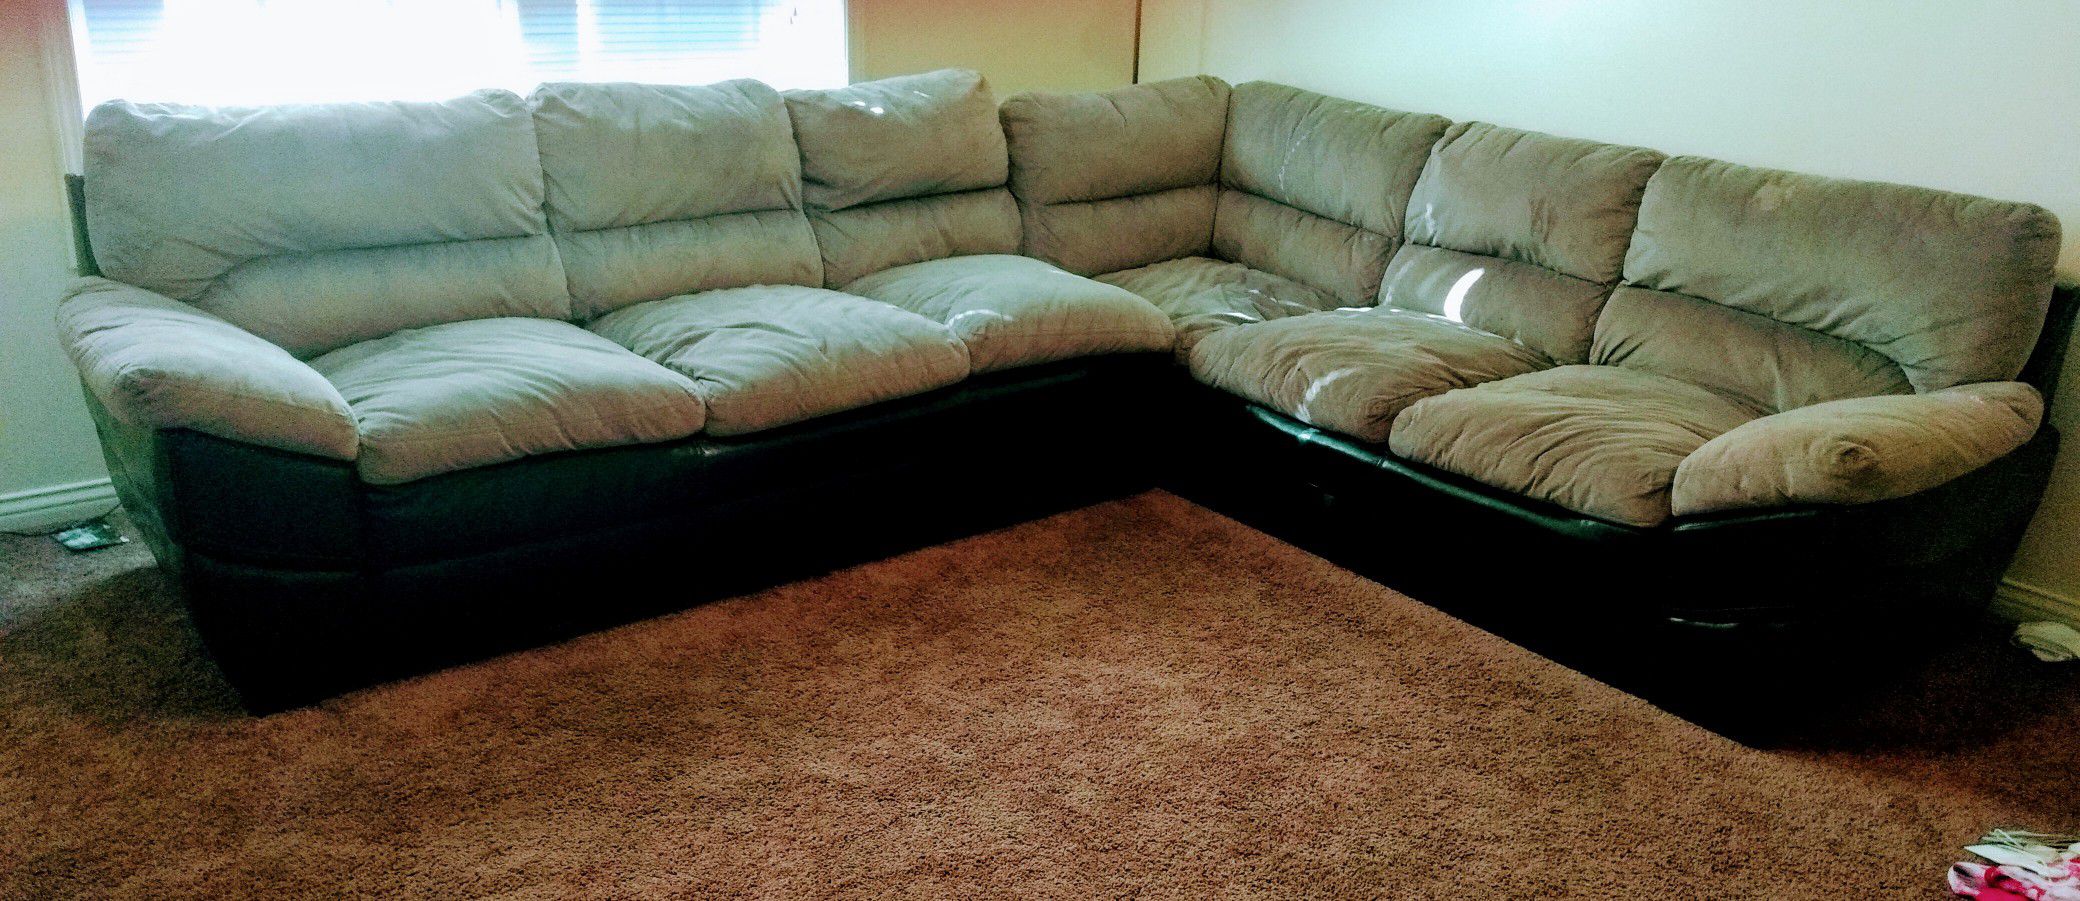 Black and gray sectional couch